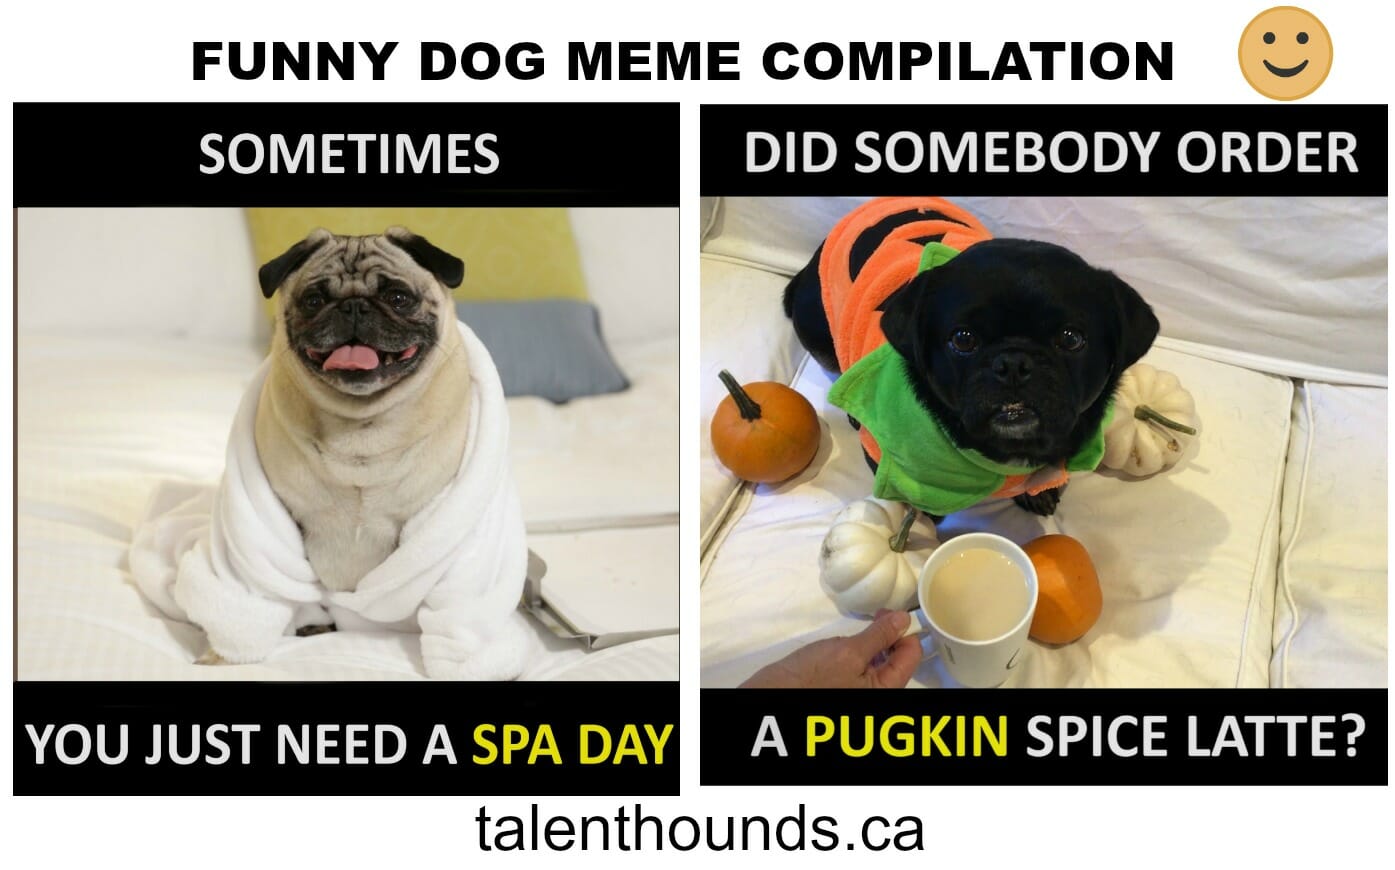 Try Not To Laugh At This Funny Dog Meme Compilation Video Talent